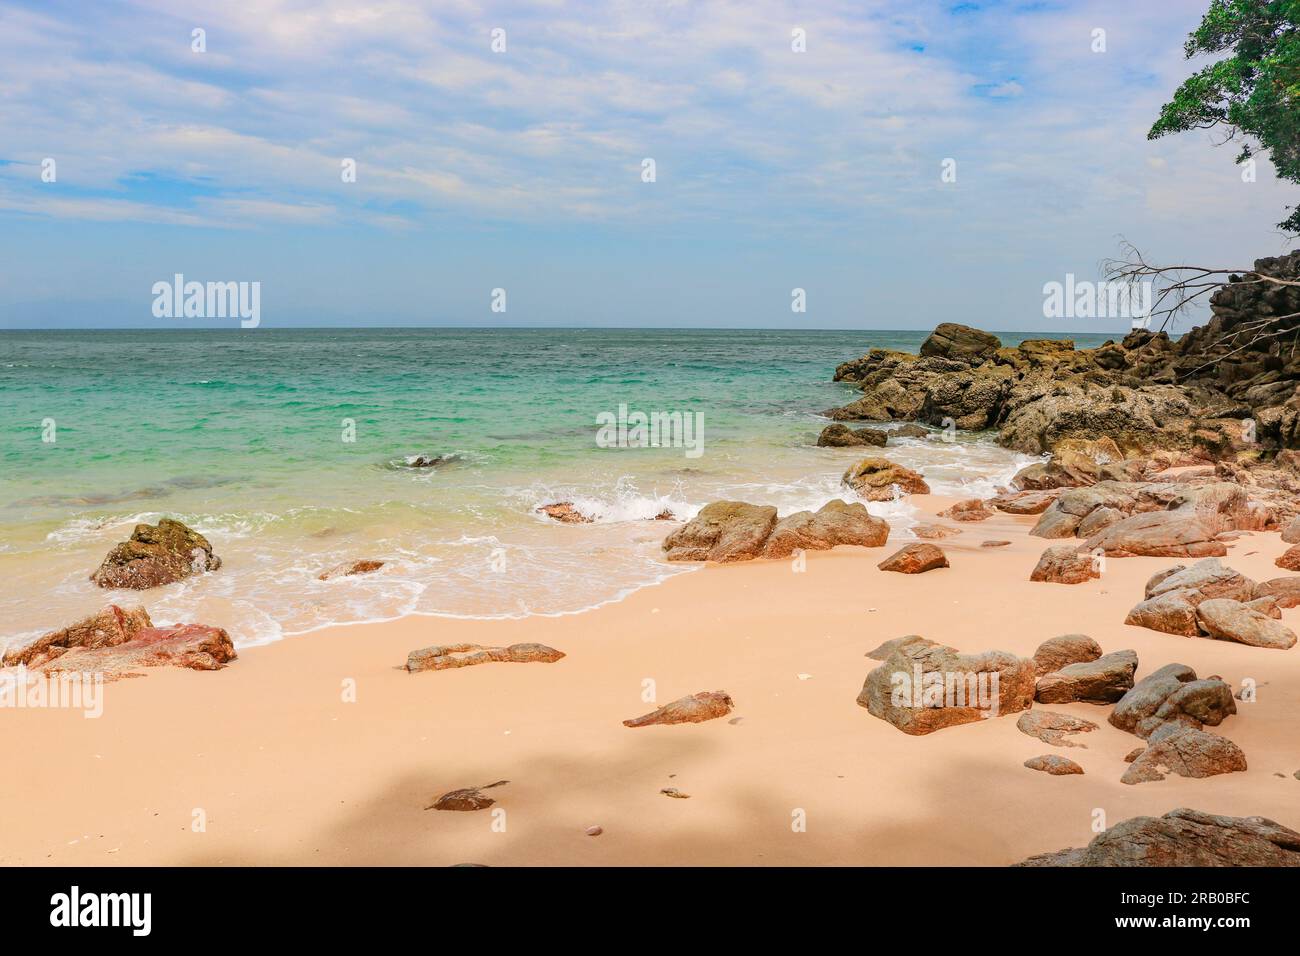 Tropical sandy rocky beach with clear clear blue water Stock Photo